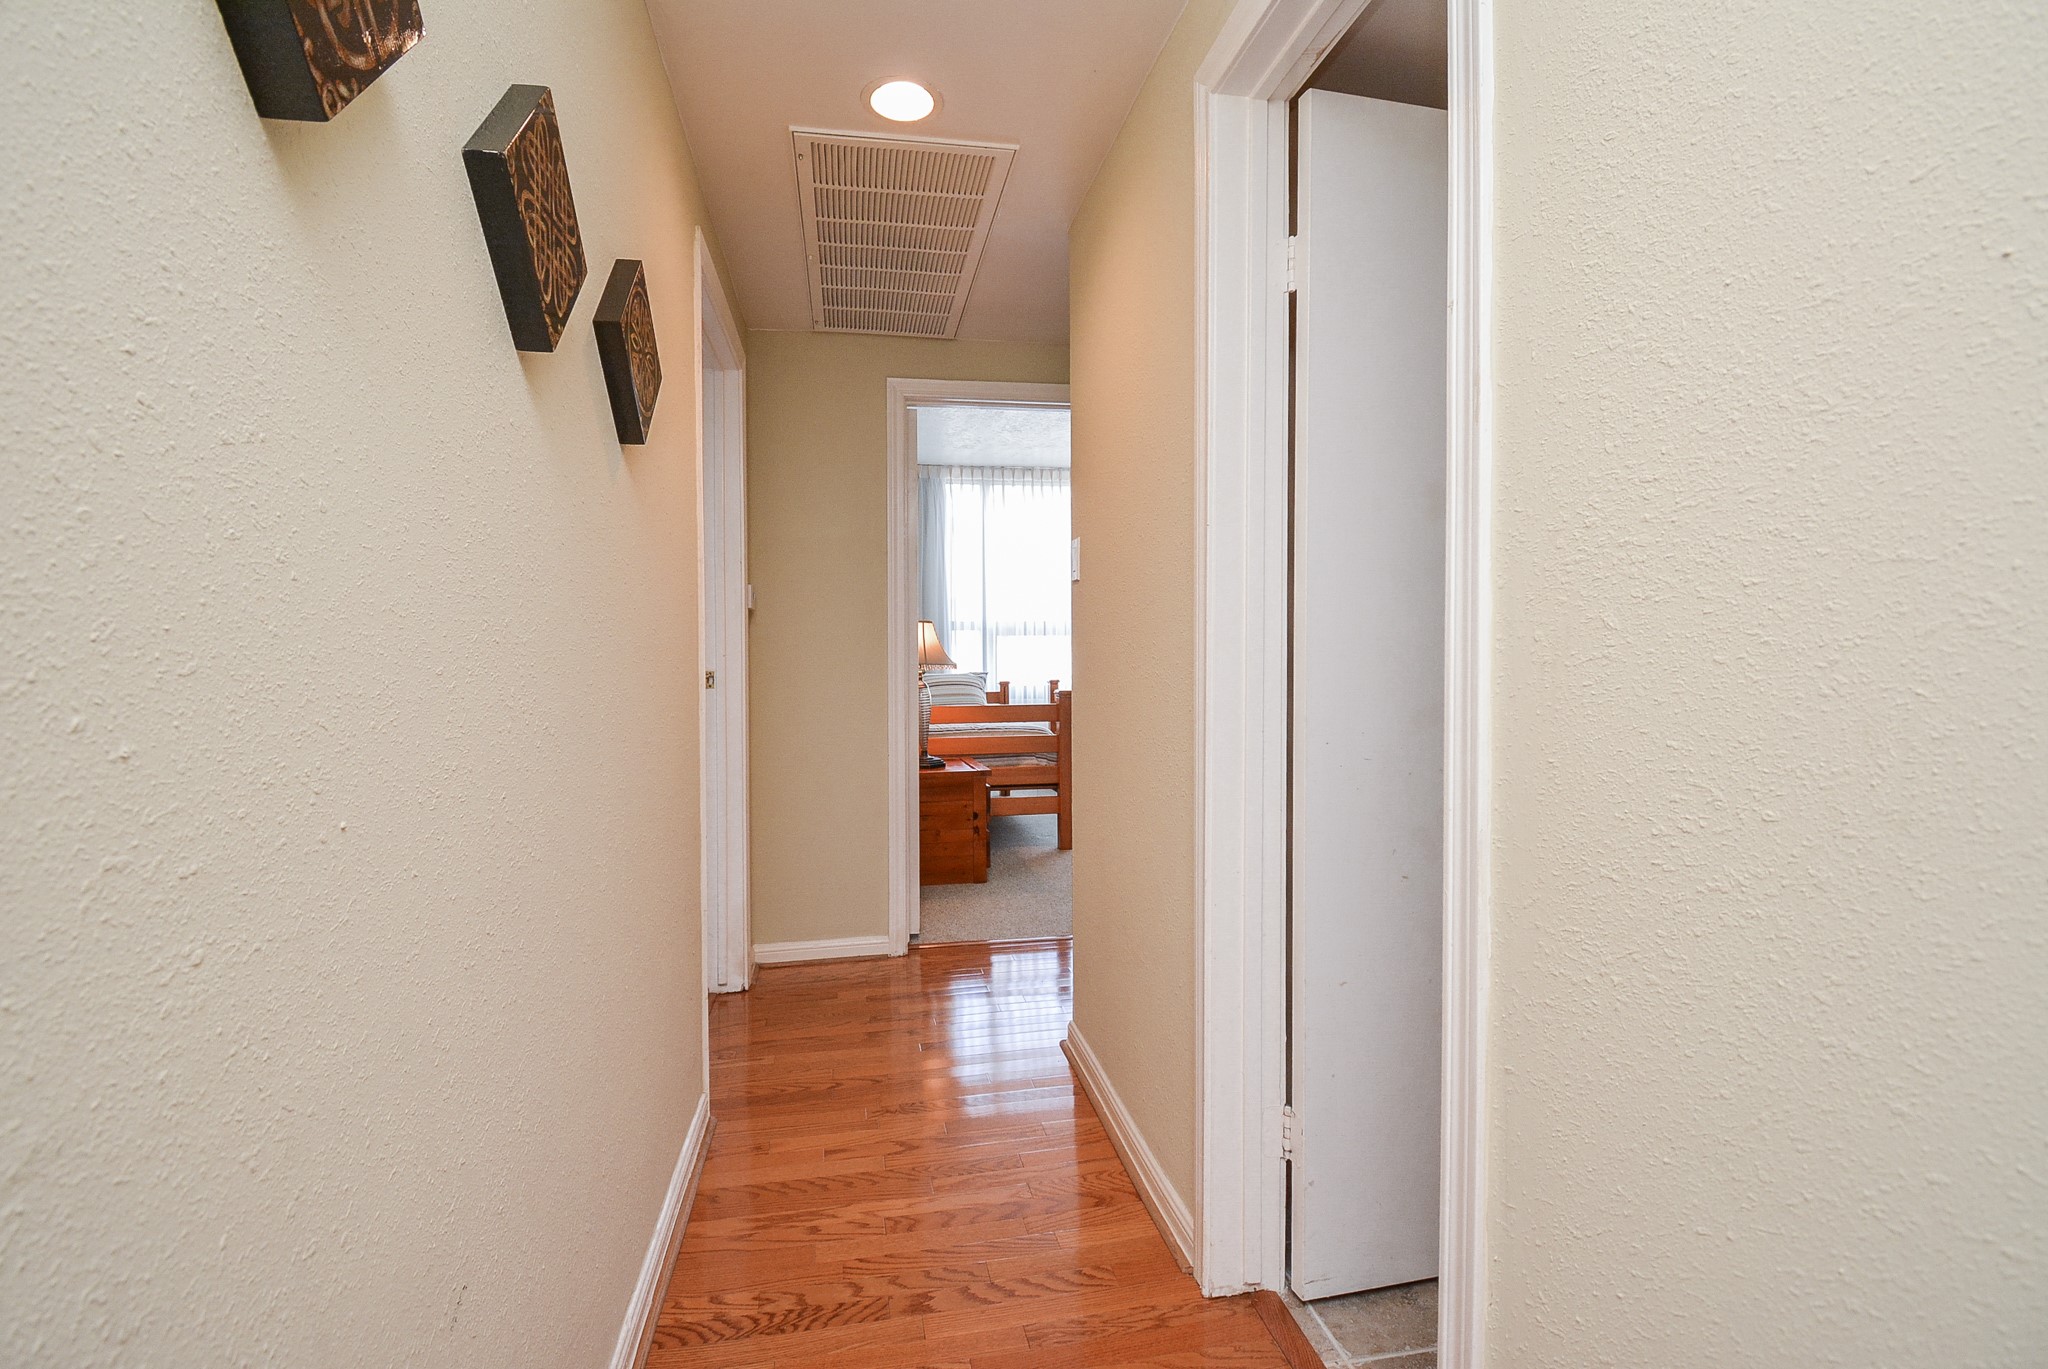 Hallway outside bedrooms and secondary bathroom.  Secondary bathroom is the open door to the immediate right.